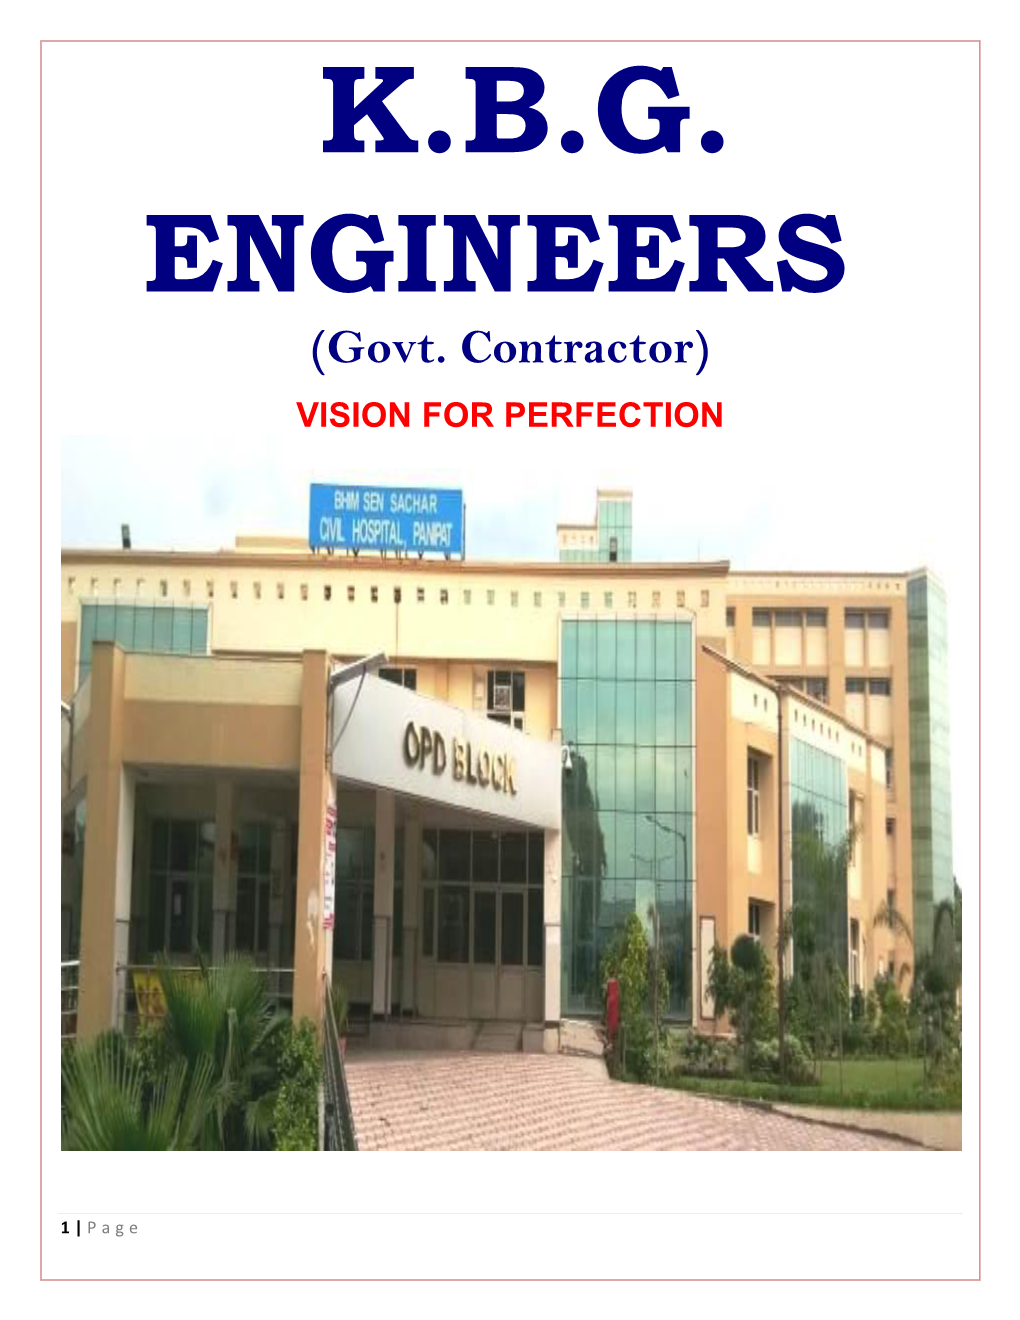 Govt. Contractor) VISION for PERFECTION